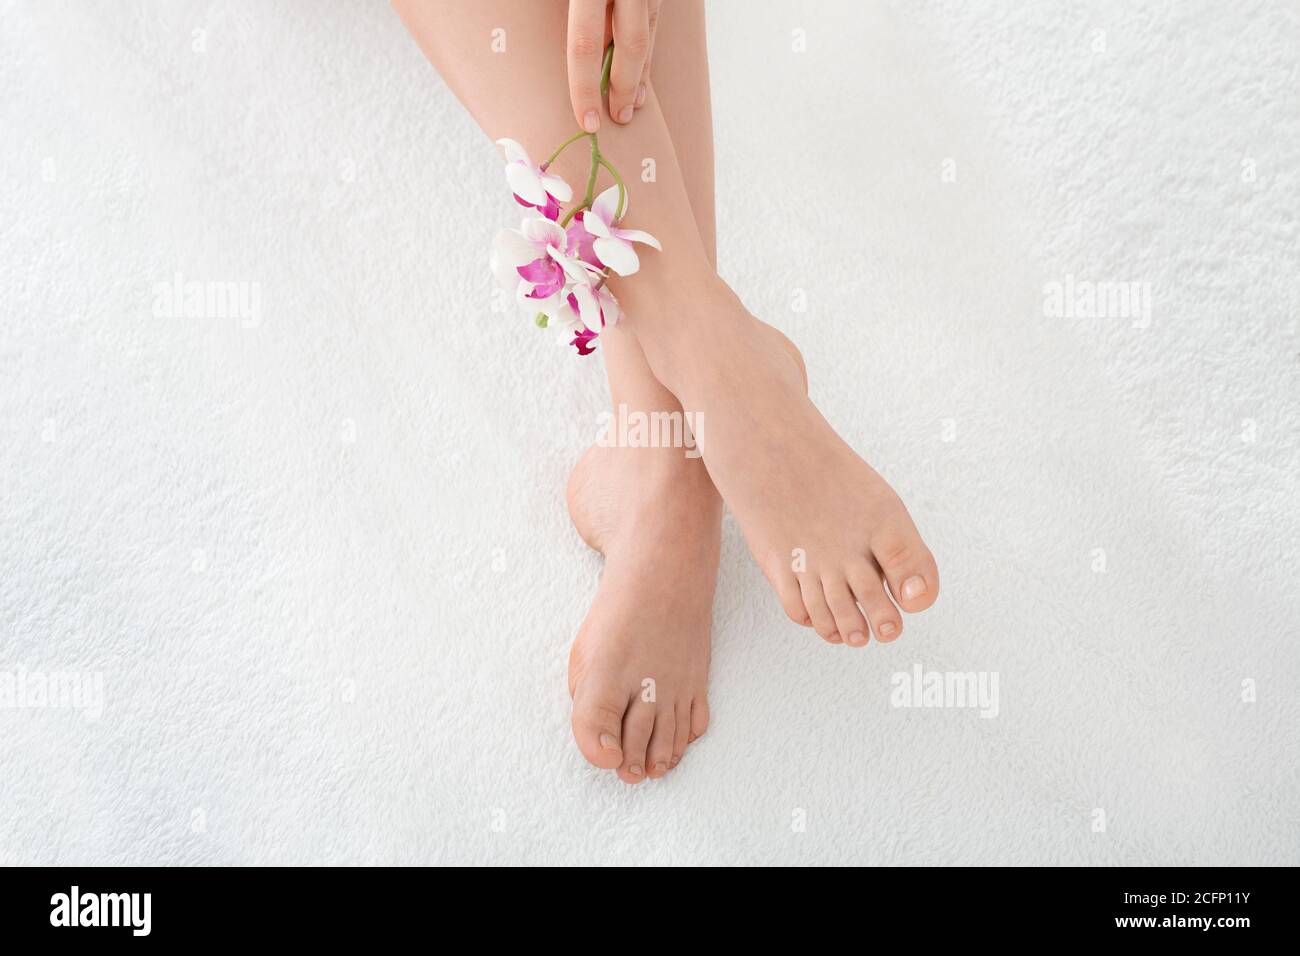 Beautiful legs concept. Female well-groomed legs and pedicures with flower Stock Photo